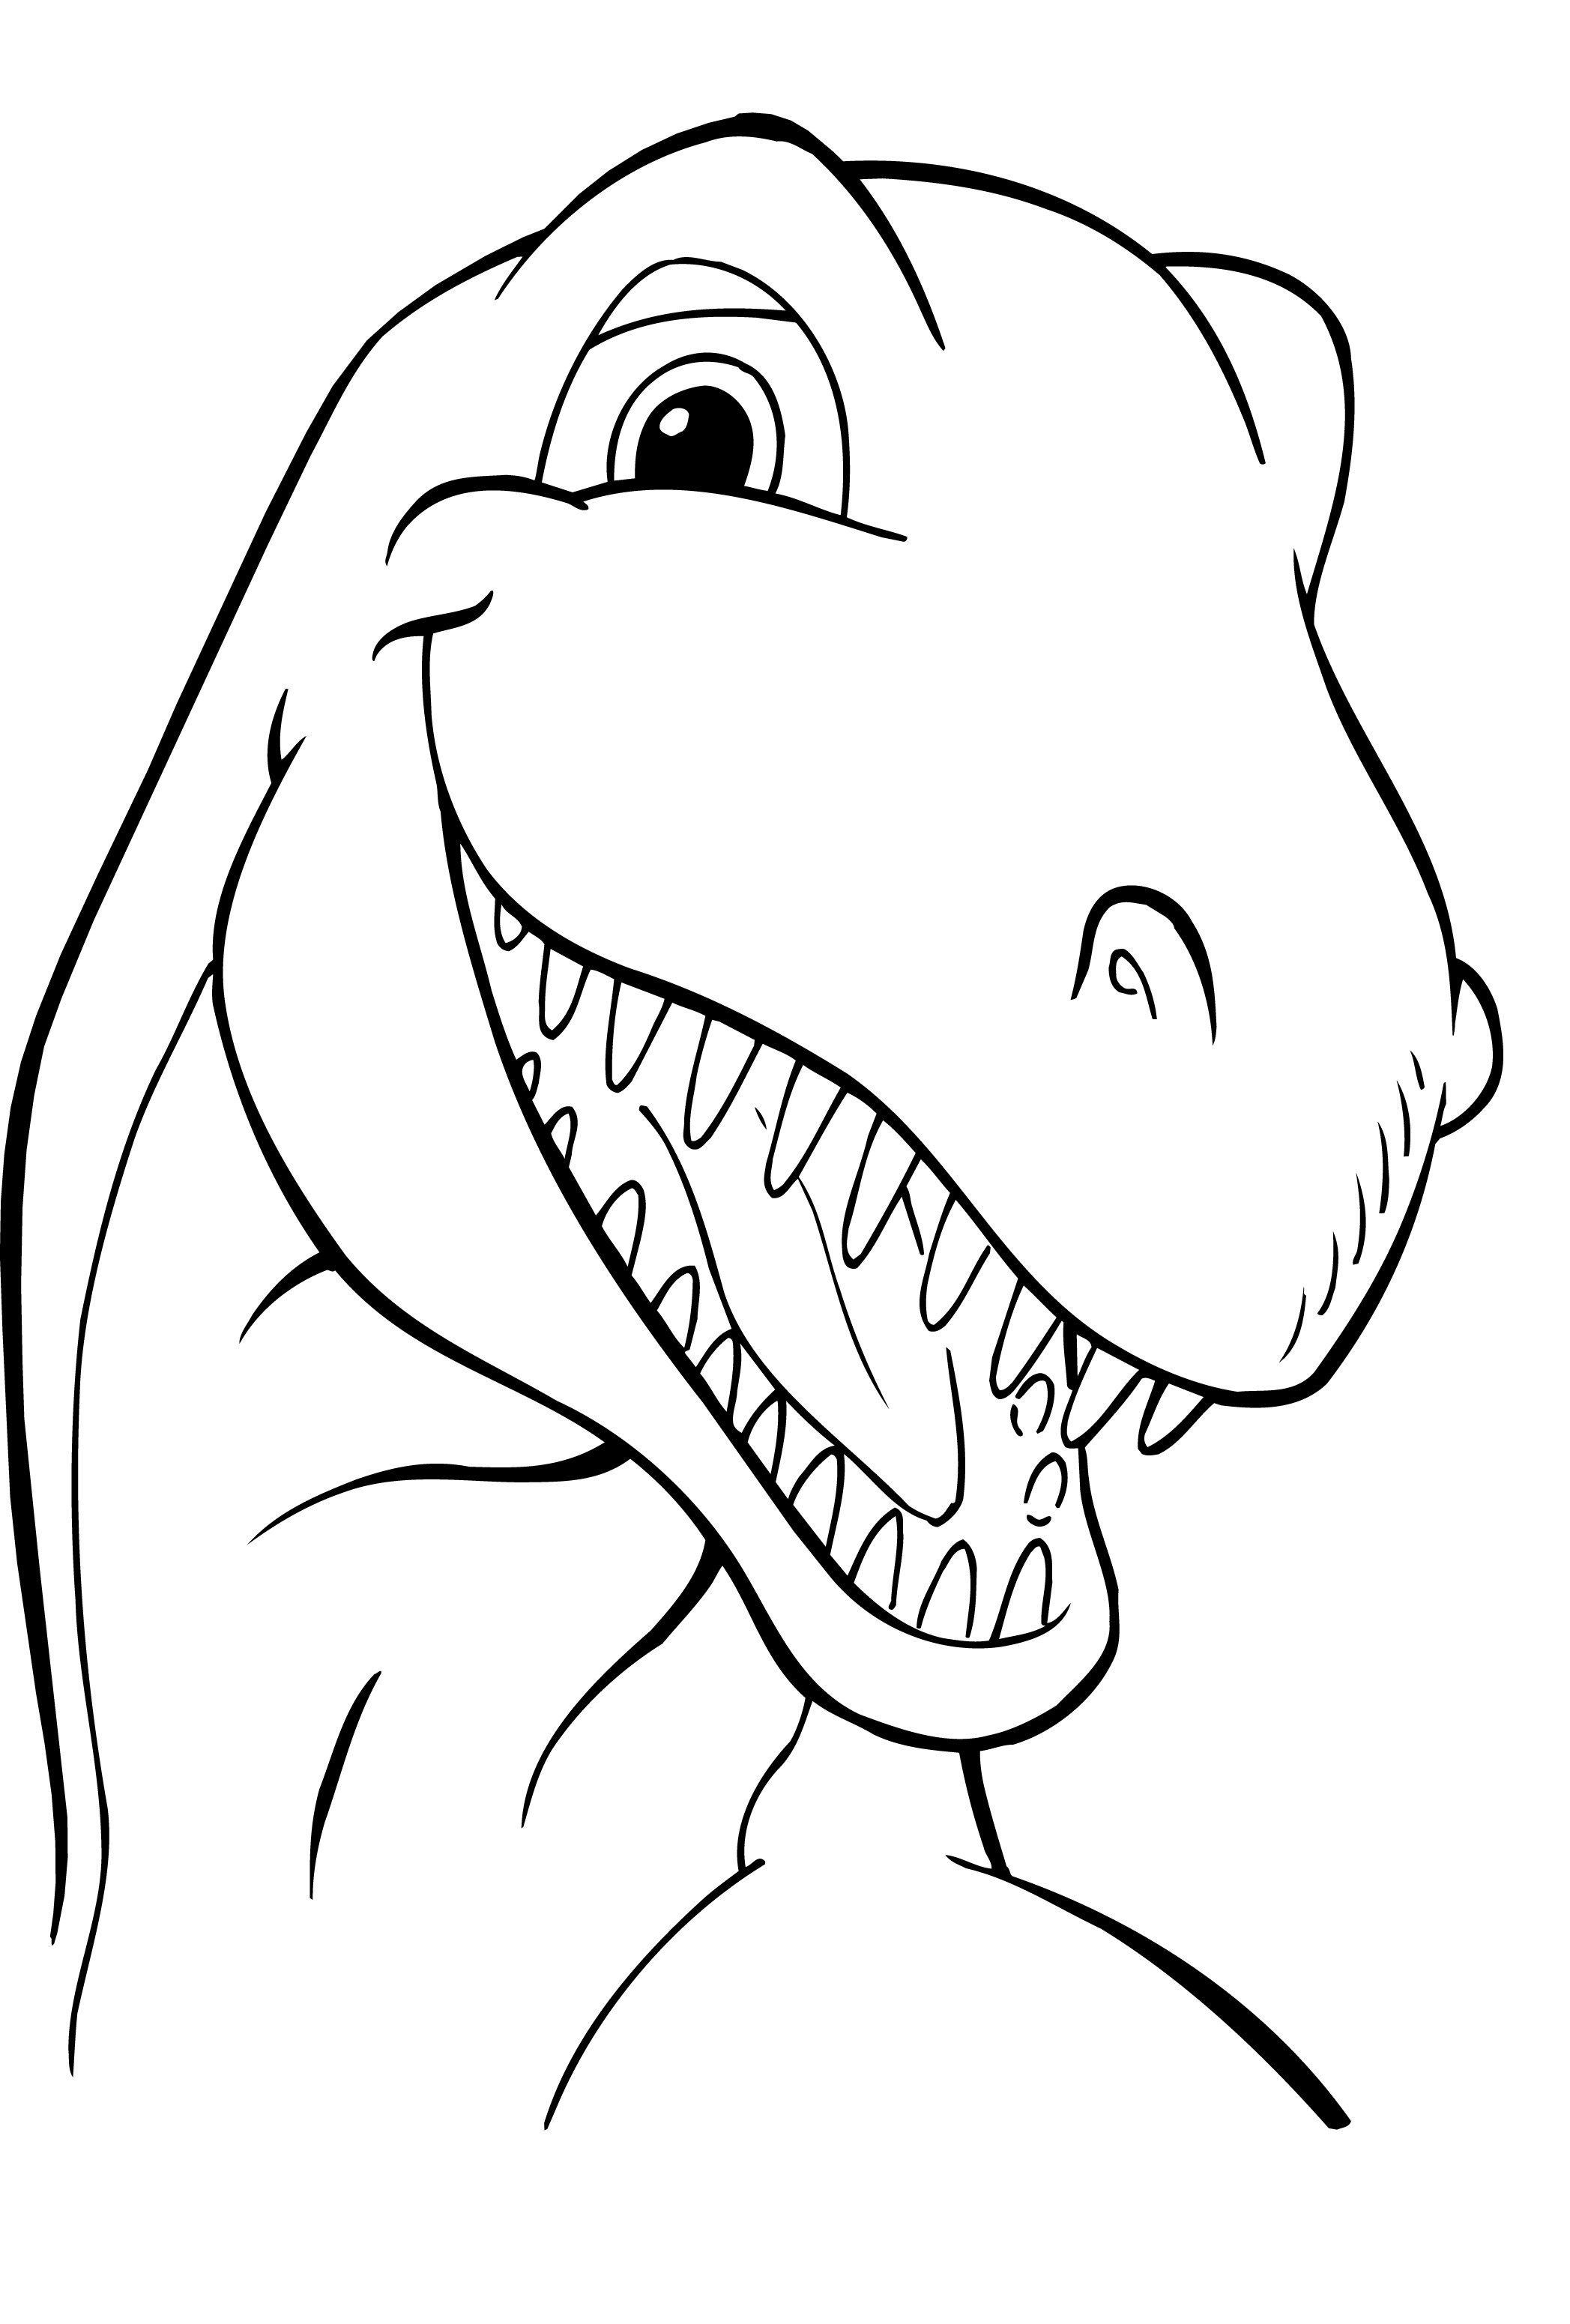 488 Simple Printable Dinosaur Coloring Pages for Adult